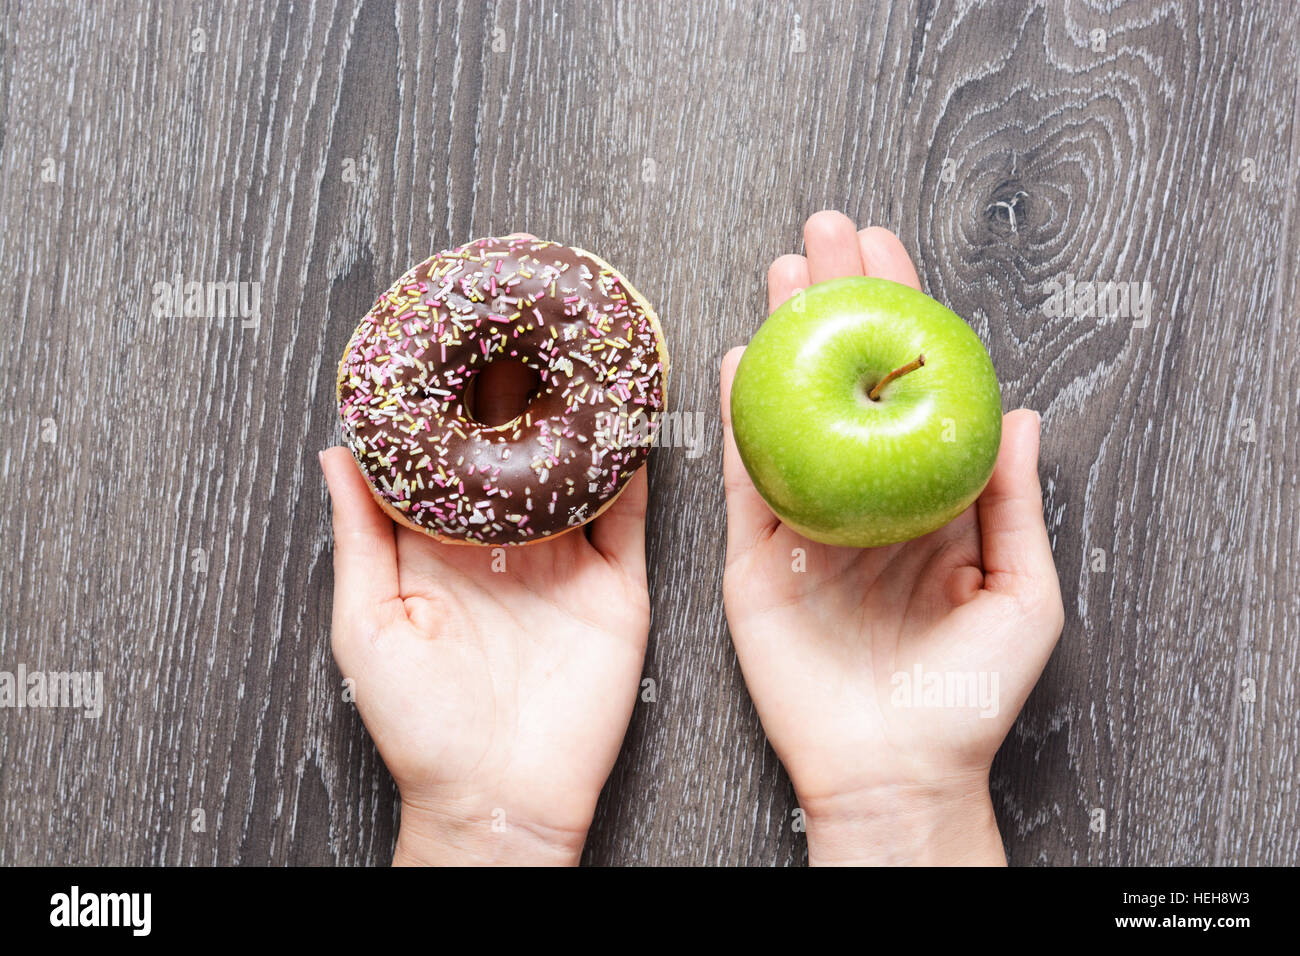 Healthy lifestyle or nutrition concept with young woman holding in hands an green apple and a donut Stock Photo